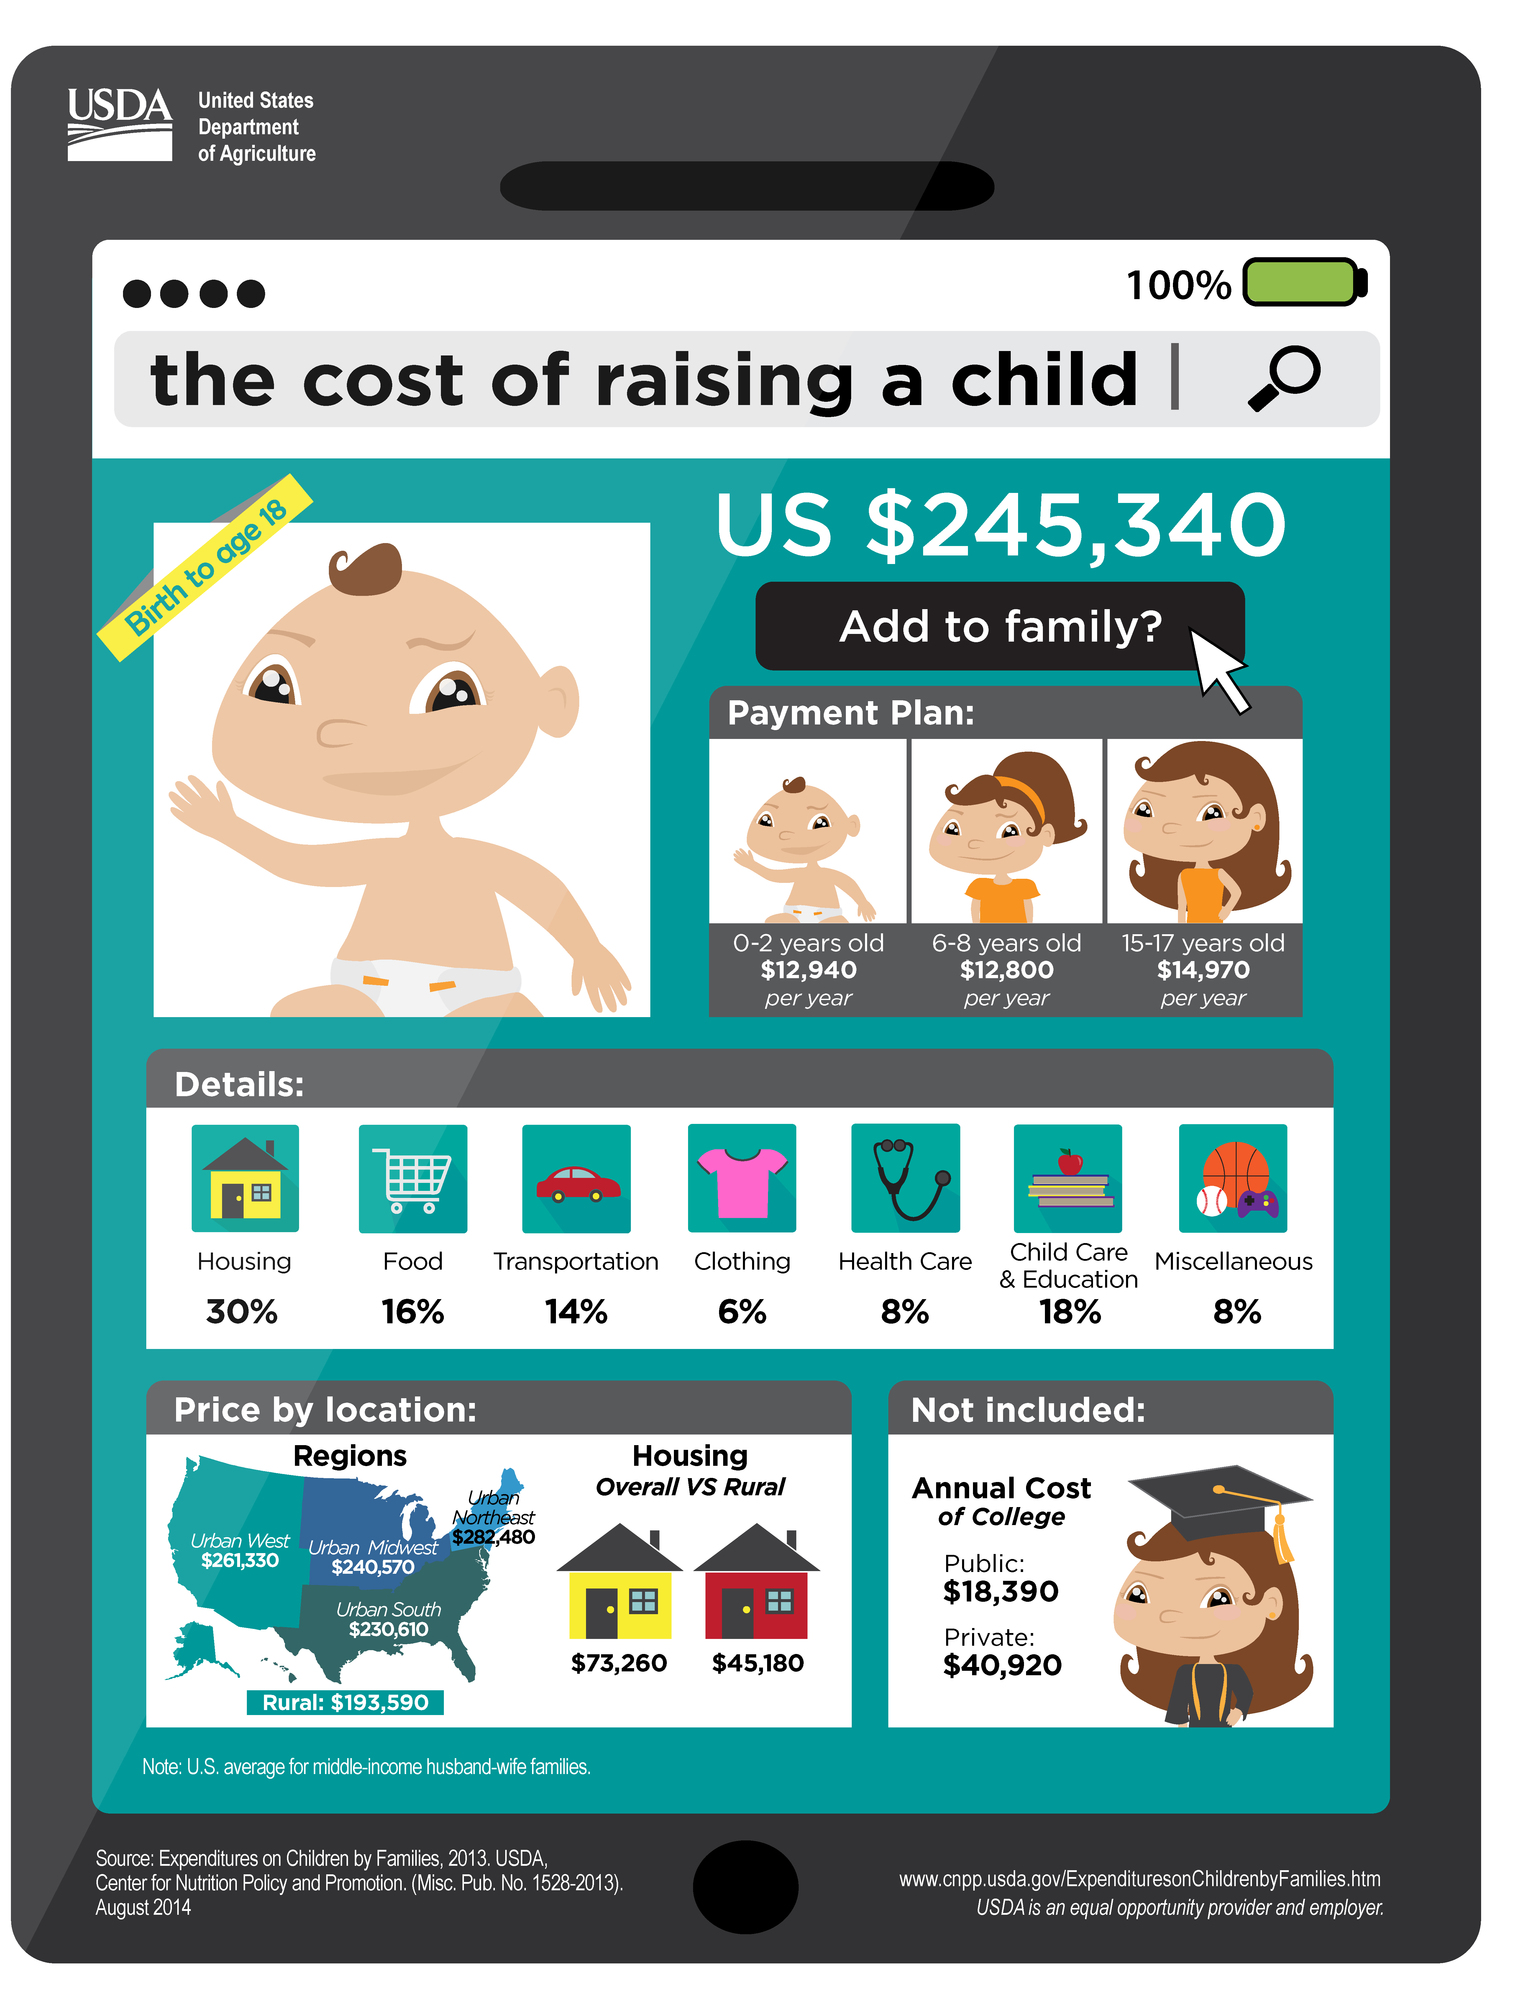 It will cost over $240,000 to raise a child born in 2013